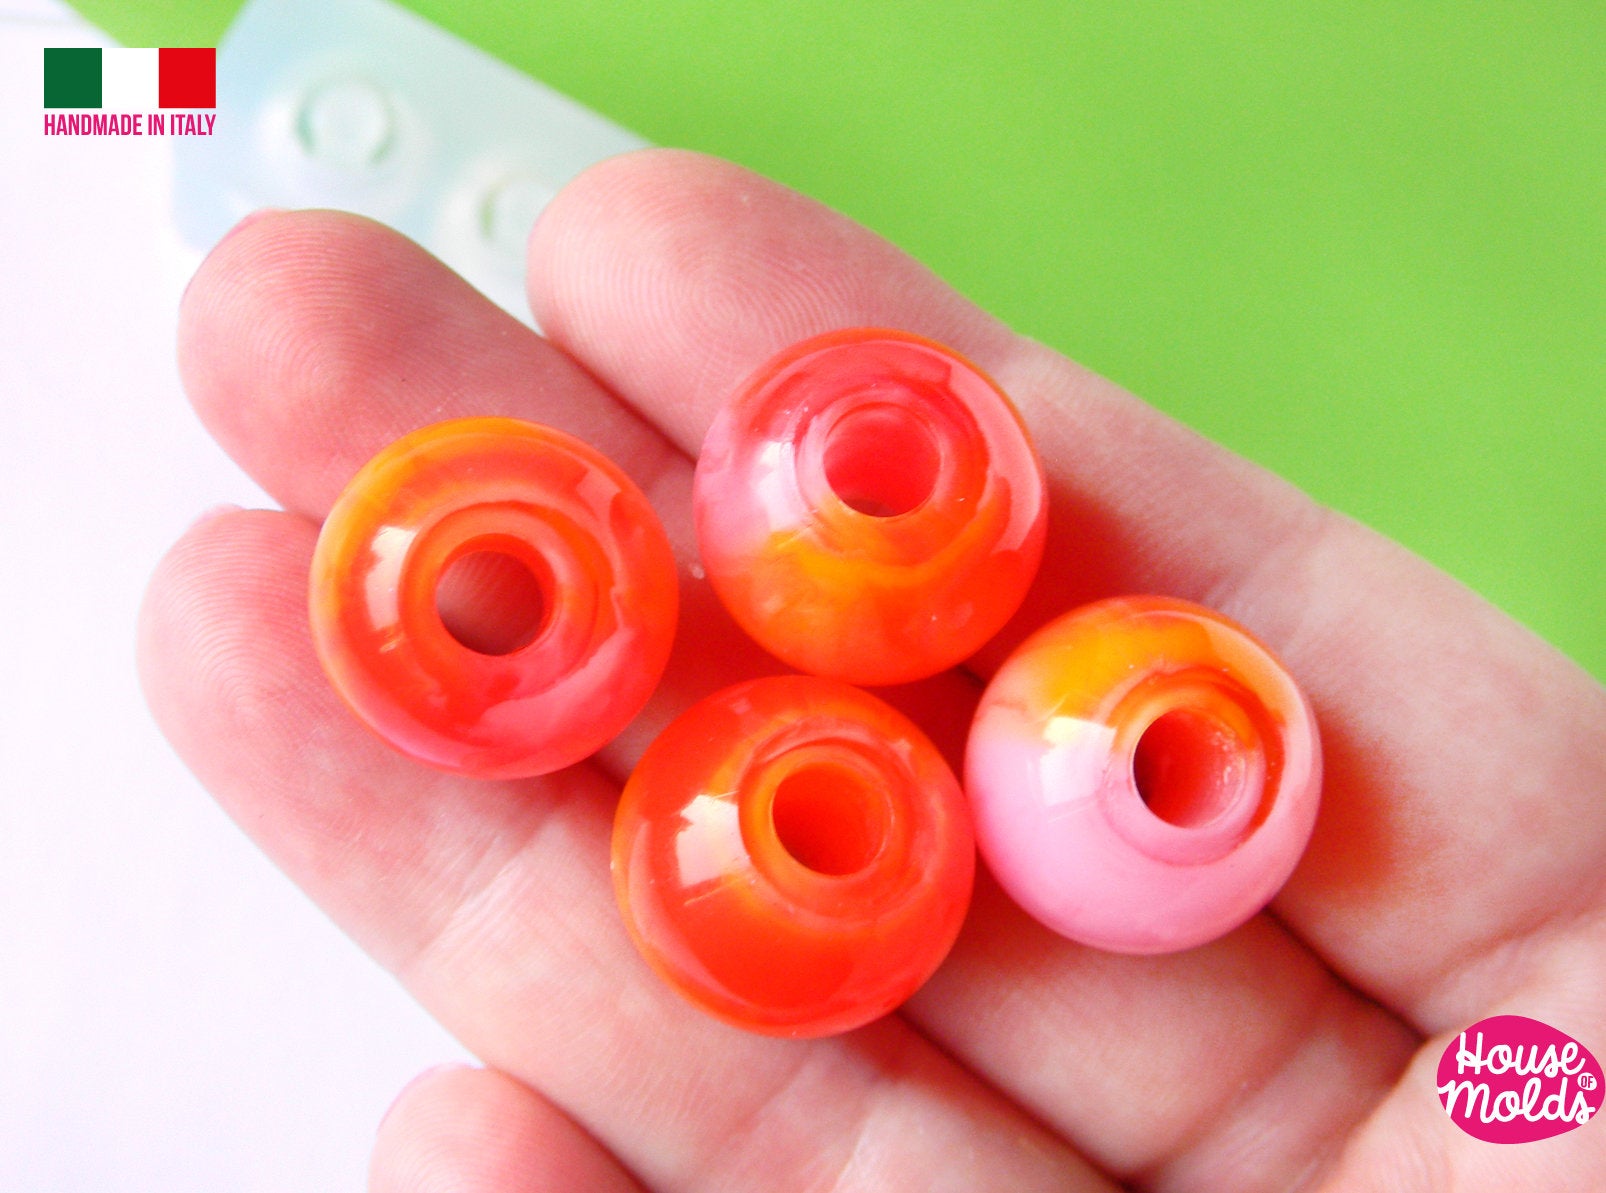 SNASAN 4piece Silicone Mold For Ball Bead Jewelry Making 12mm 16mm